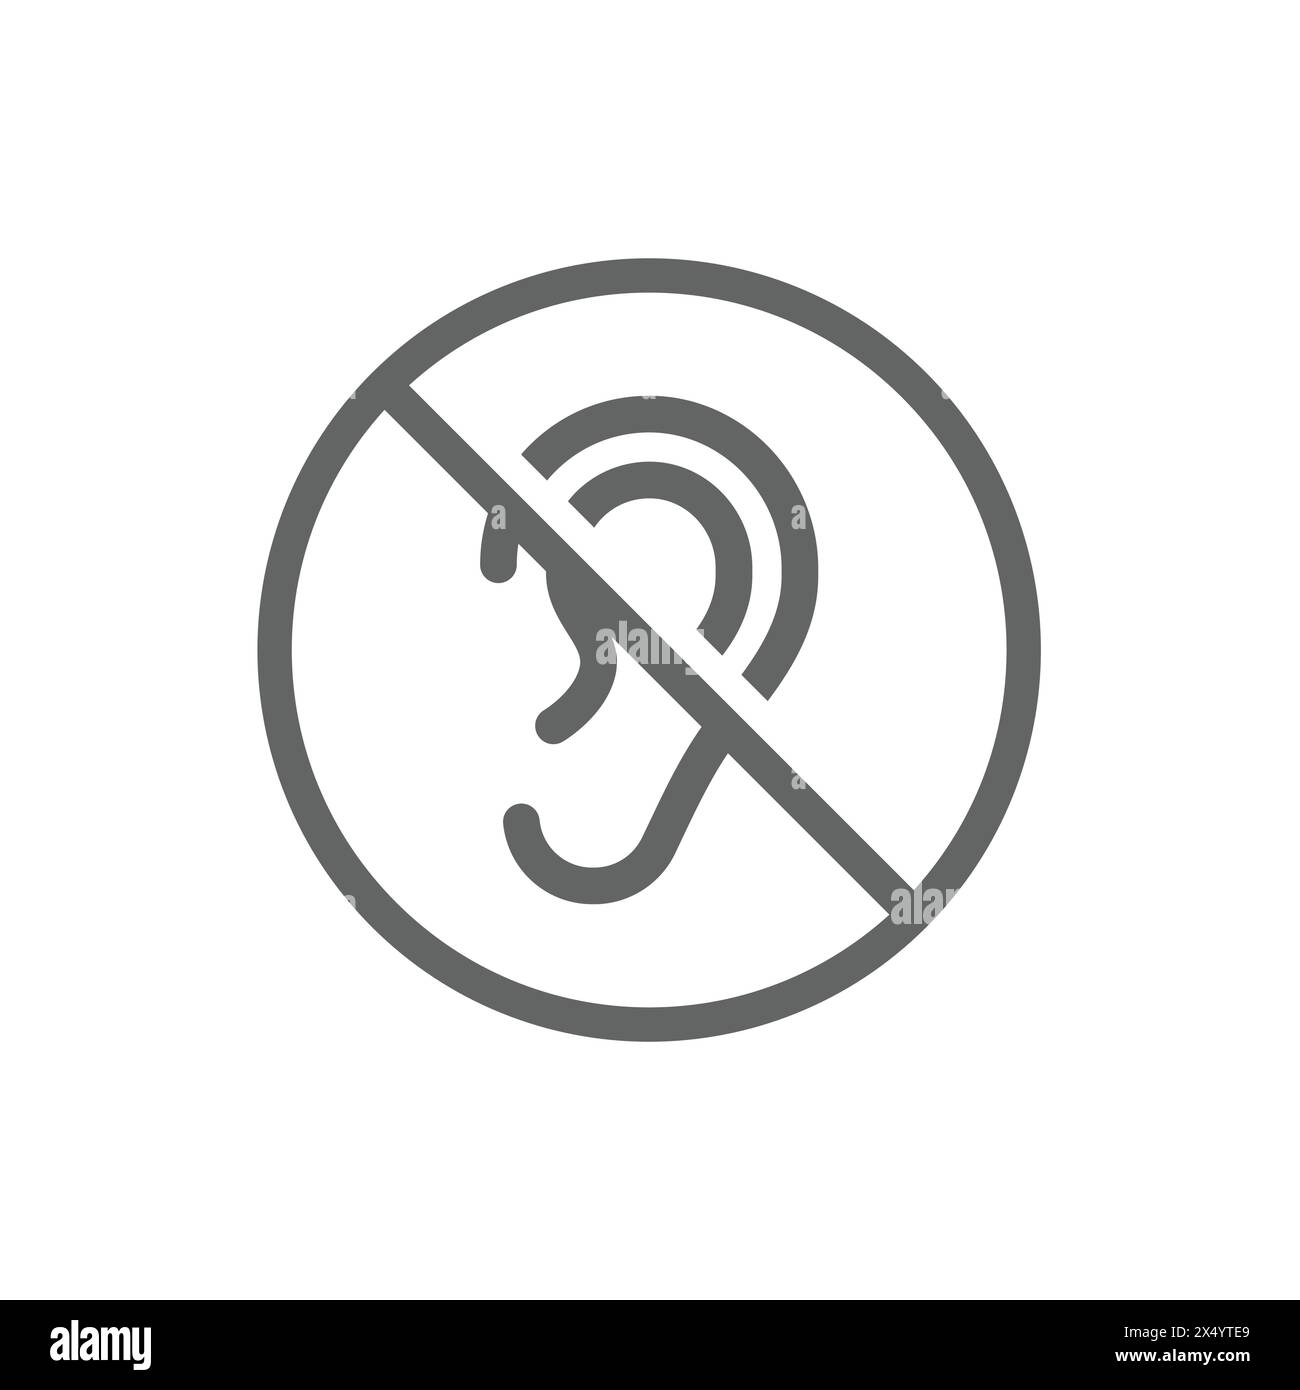 No hearing vector icon. Silence and no listening or deafness sign. Stock Vector